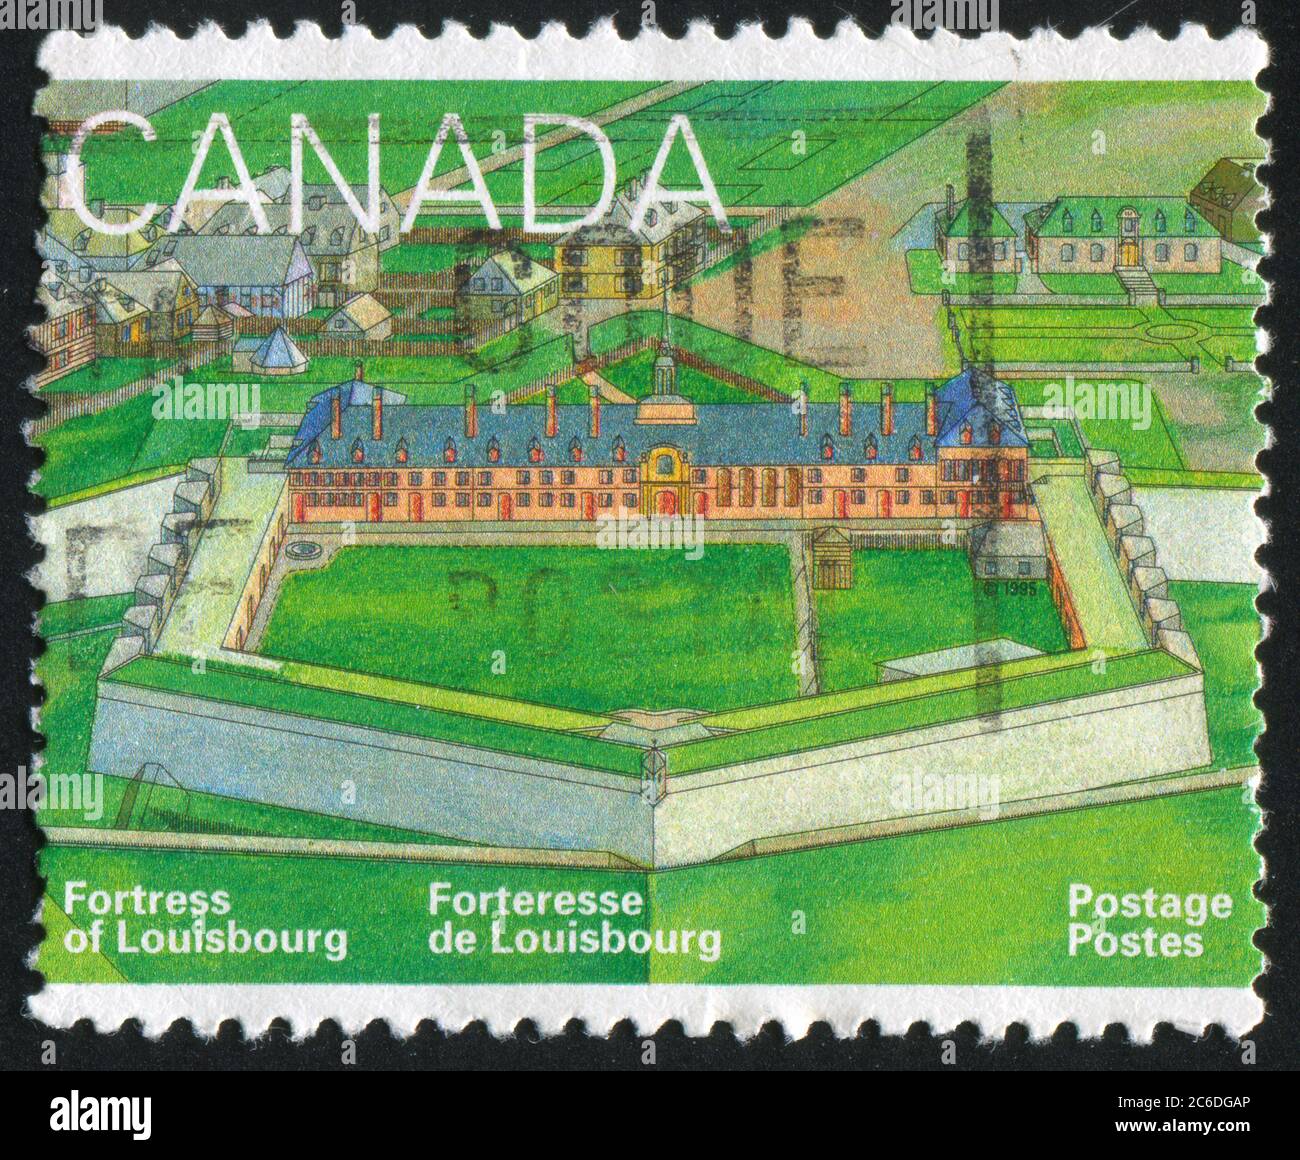 CANADA - CIRCA 1995: stamp printed by Canada, shows Fortress of Louisbourg, 275th Anniv., Museum behind King’s Bastion, circa 1995 Stock Photo